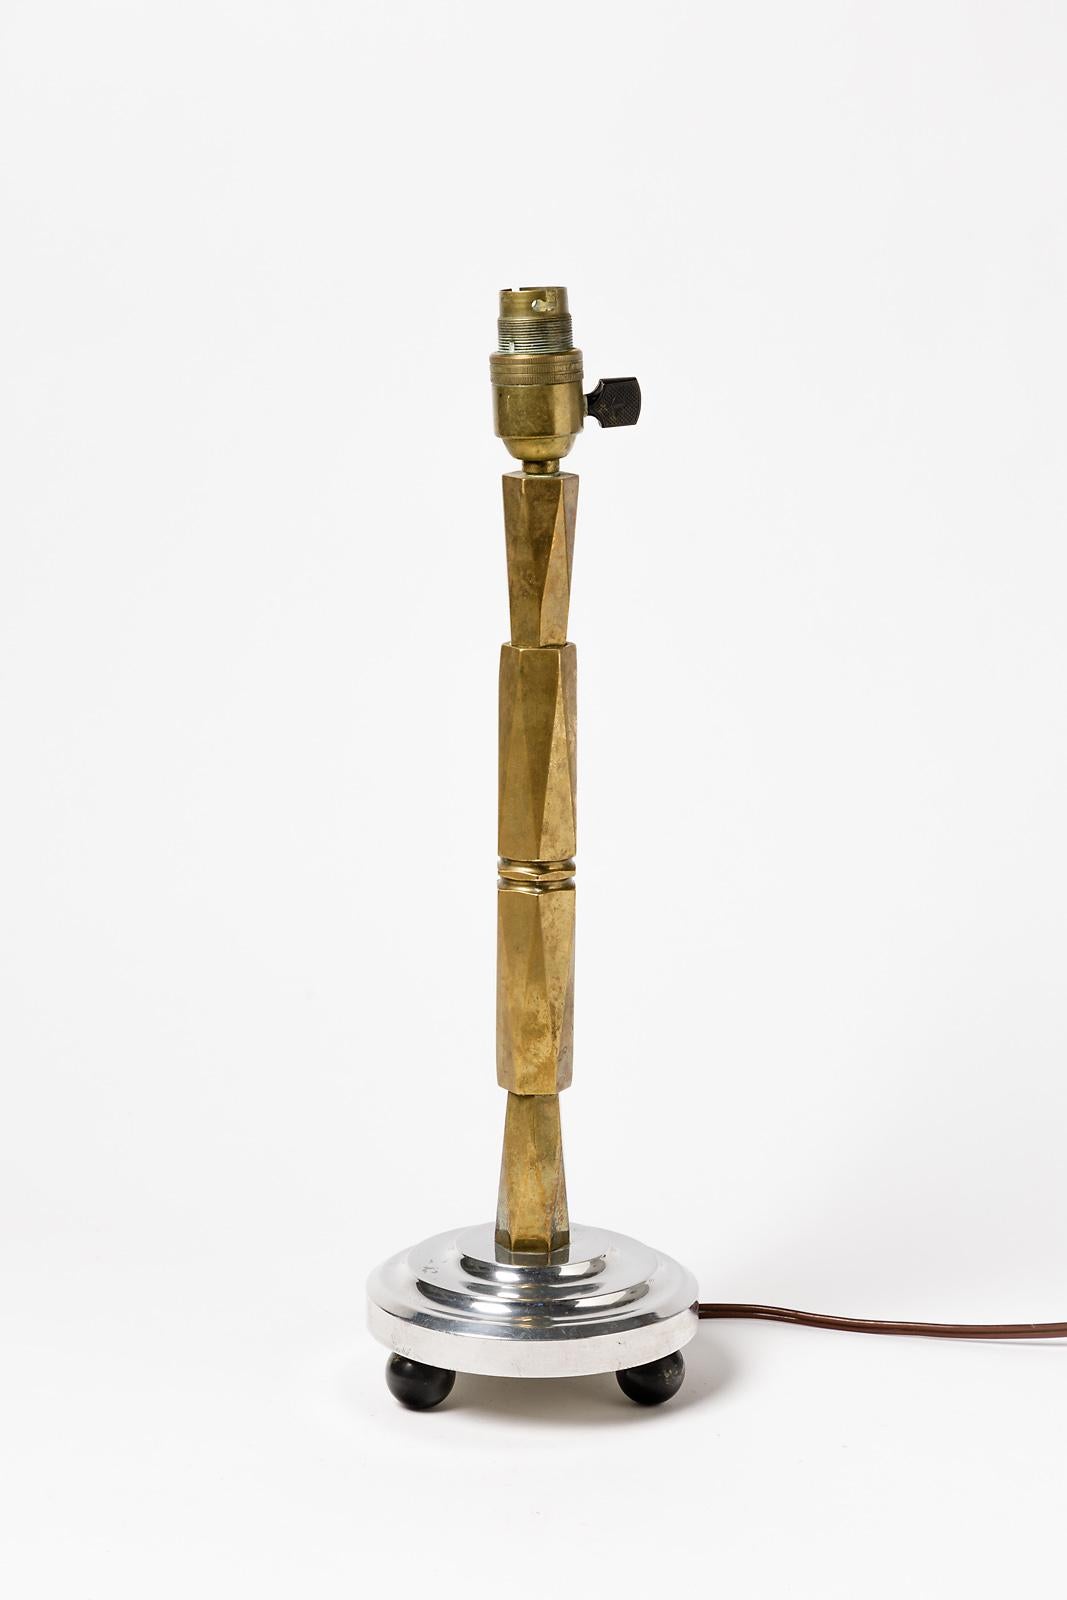 French 20th mid-century table lamp.

Art decorative golden brass and metal lamp,

circa 1930, in the style of Jules Leleu, Edgar Brandt, Ruhlmann etc..

Original perfect conditions

Electric system is ok

Sold without